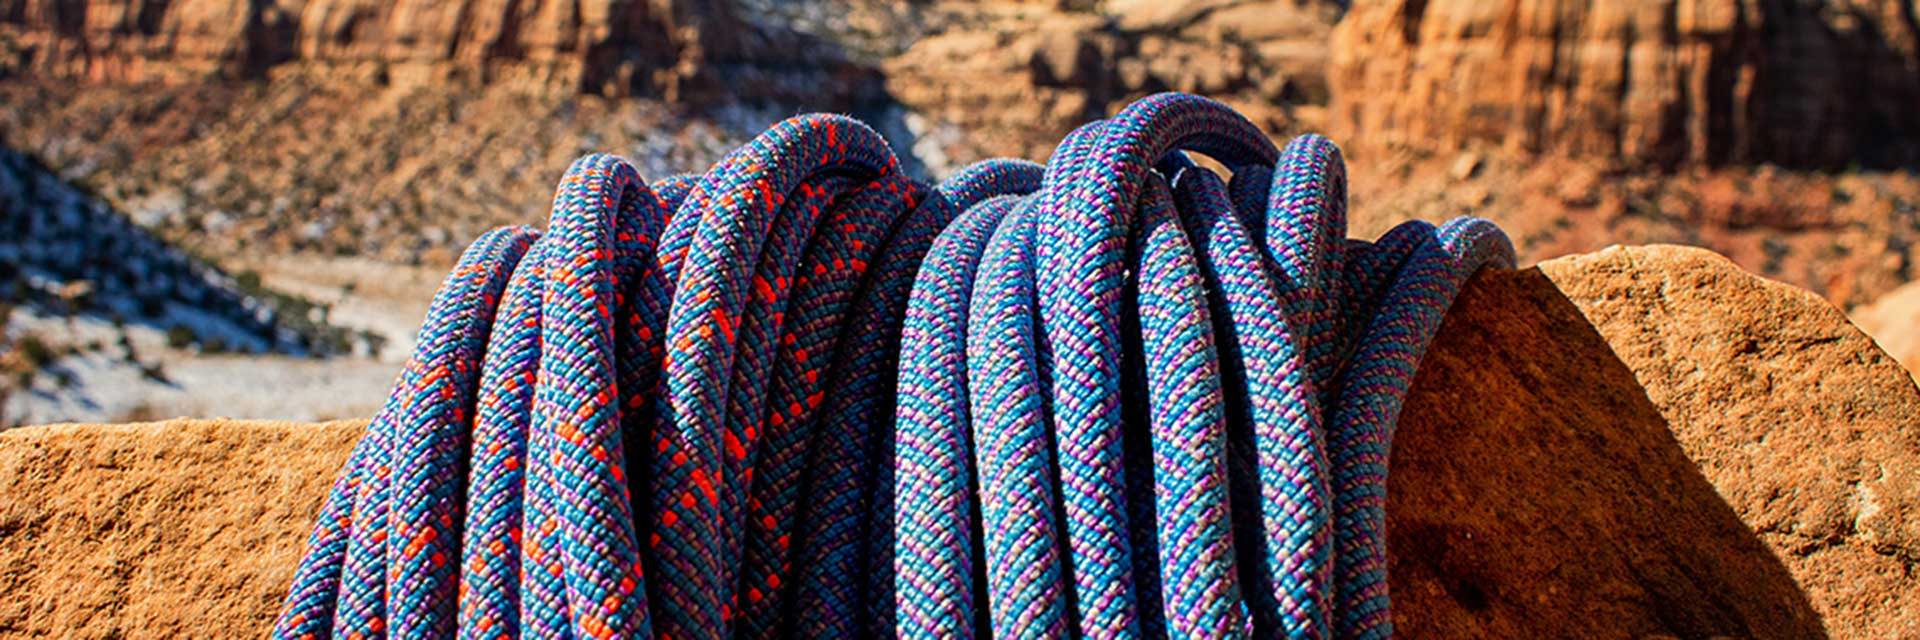 ropes laying on red rocks